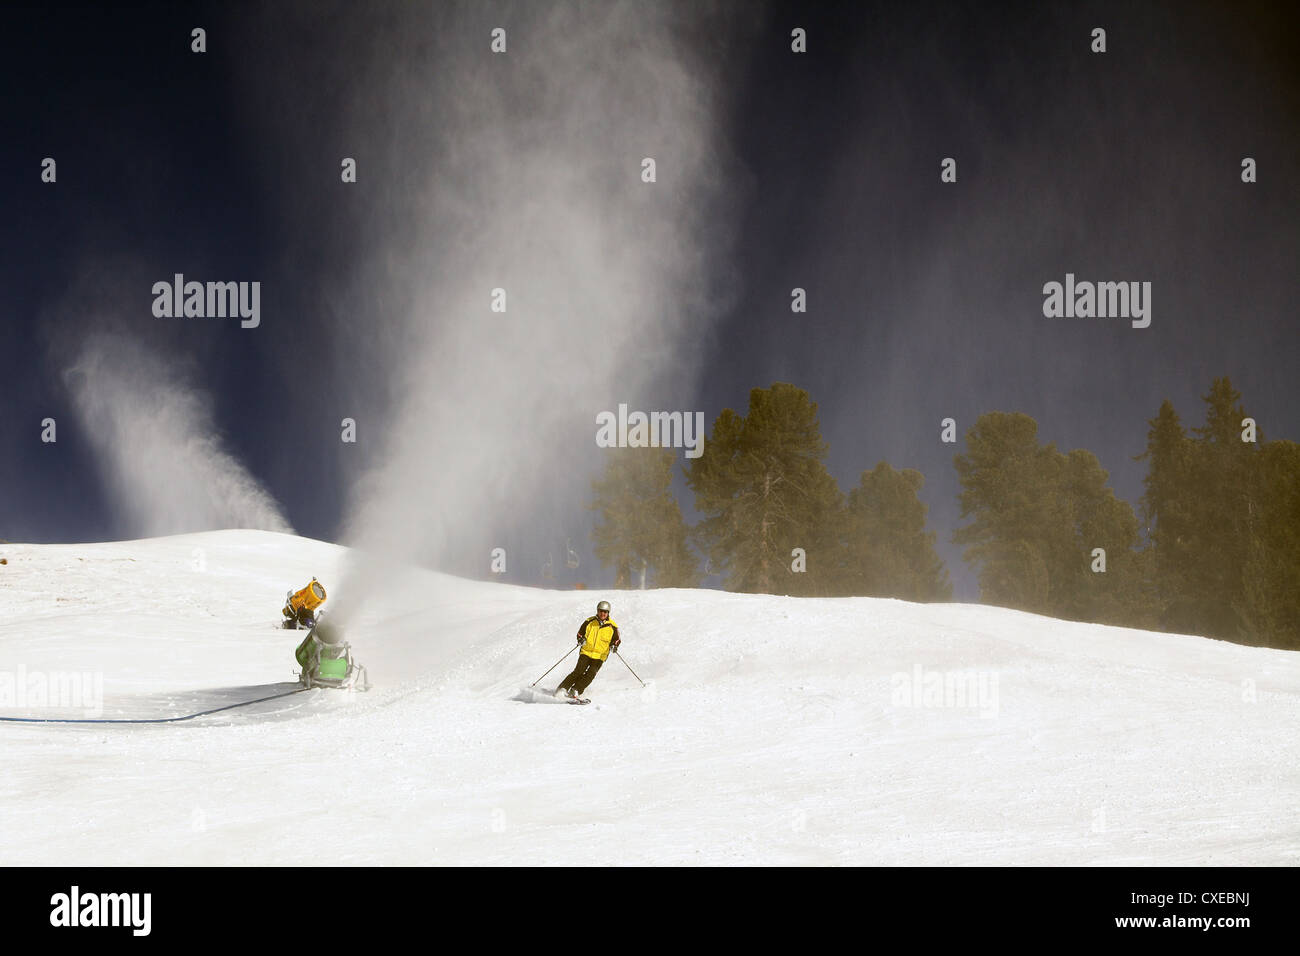 Tyrol, snow cannons to exude artificial snow on a ski slope Stock Photo